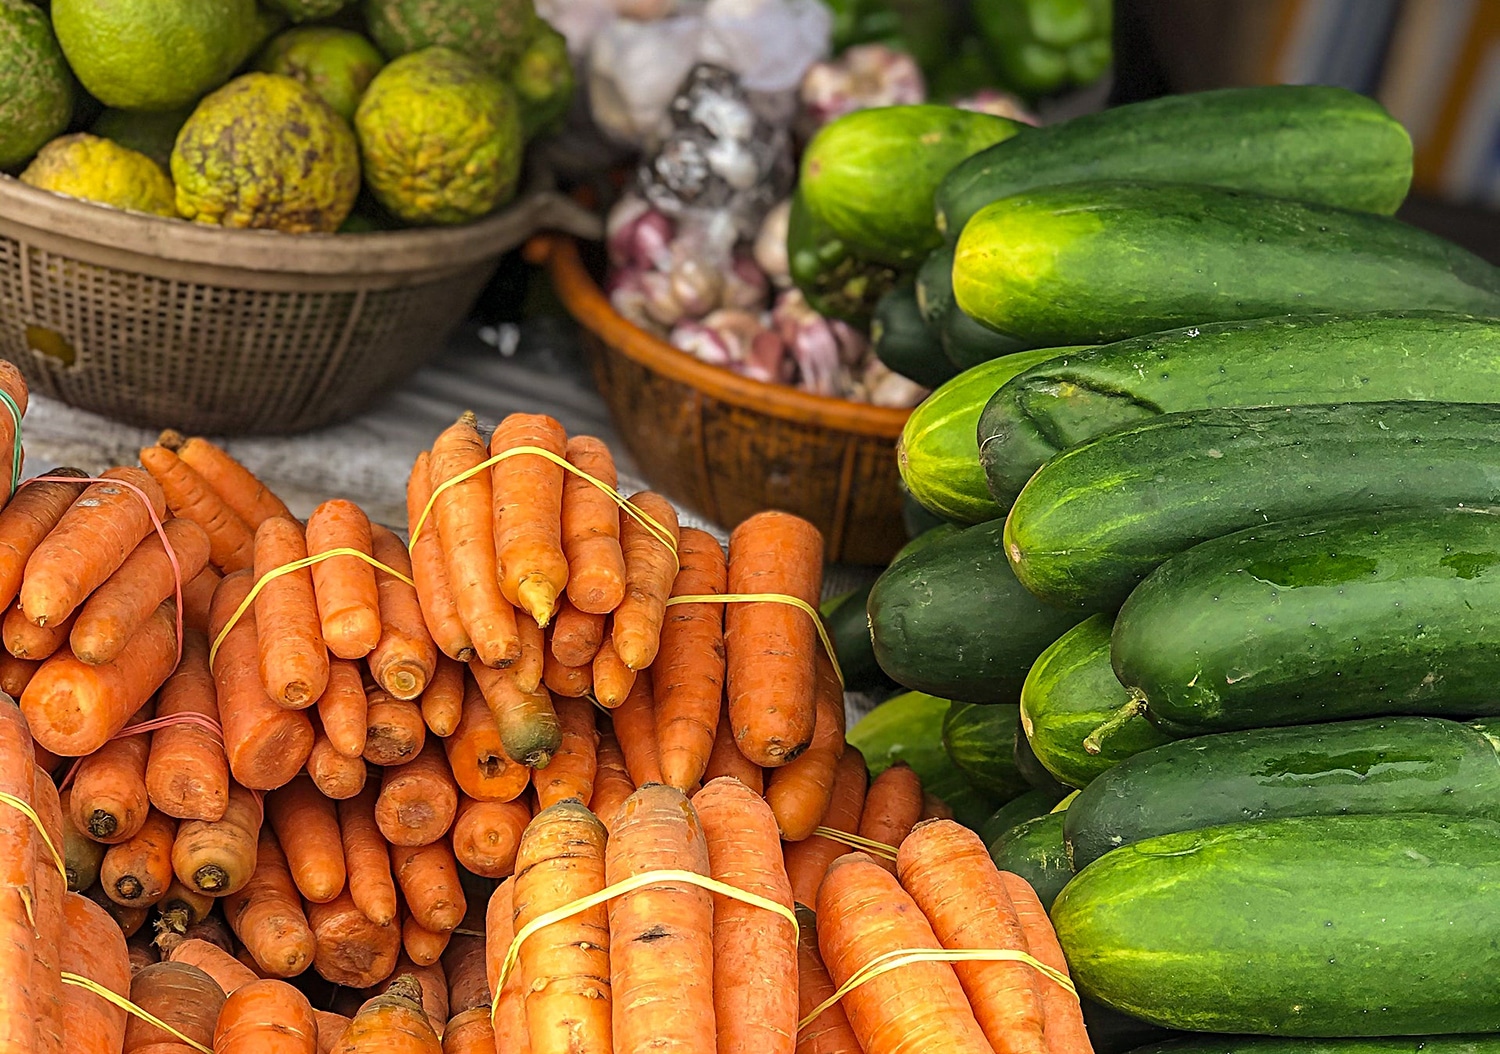 horizontal photo of fresh vegetables for a farmers market item with carrots and cucumbers in the foreground and other fruit and vegetables in the background. Image Pexels https://www.pexels.com/photo/assorted-fresh-vegetables-in-street-market-4258186/